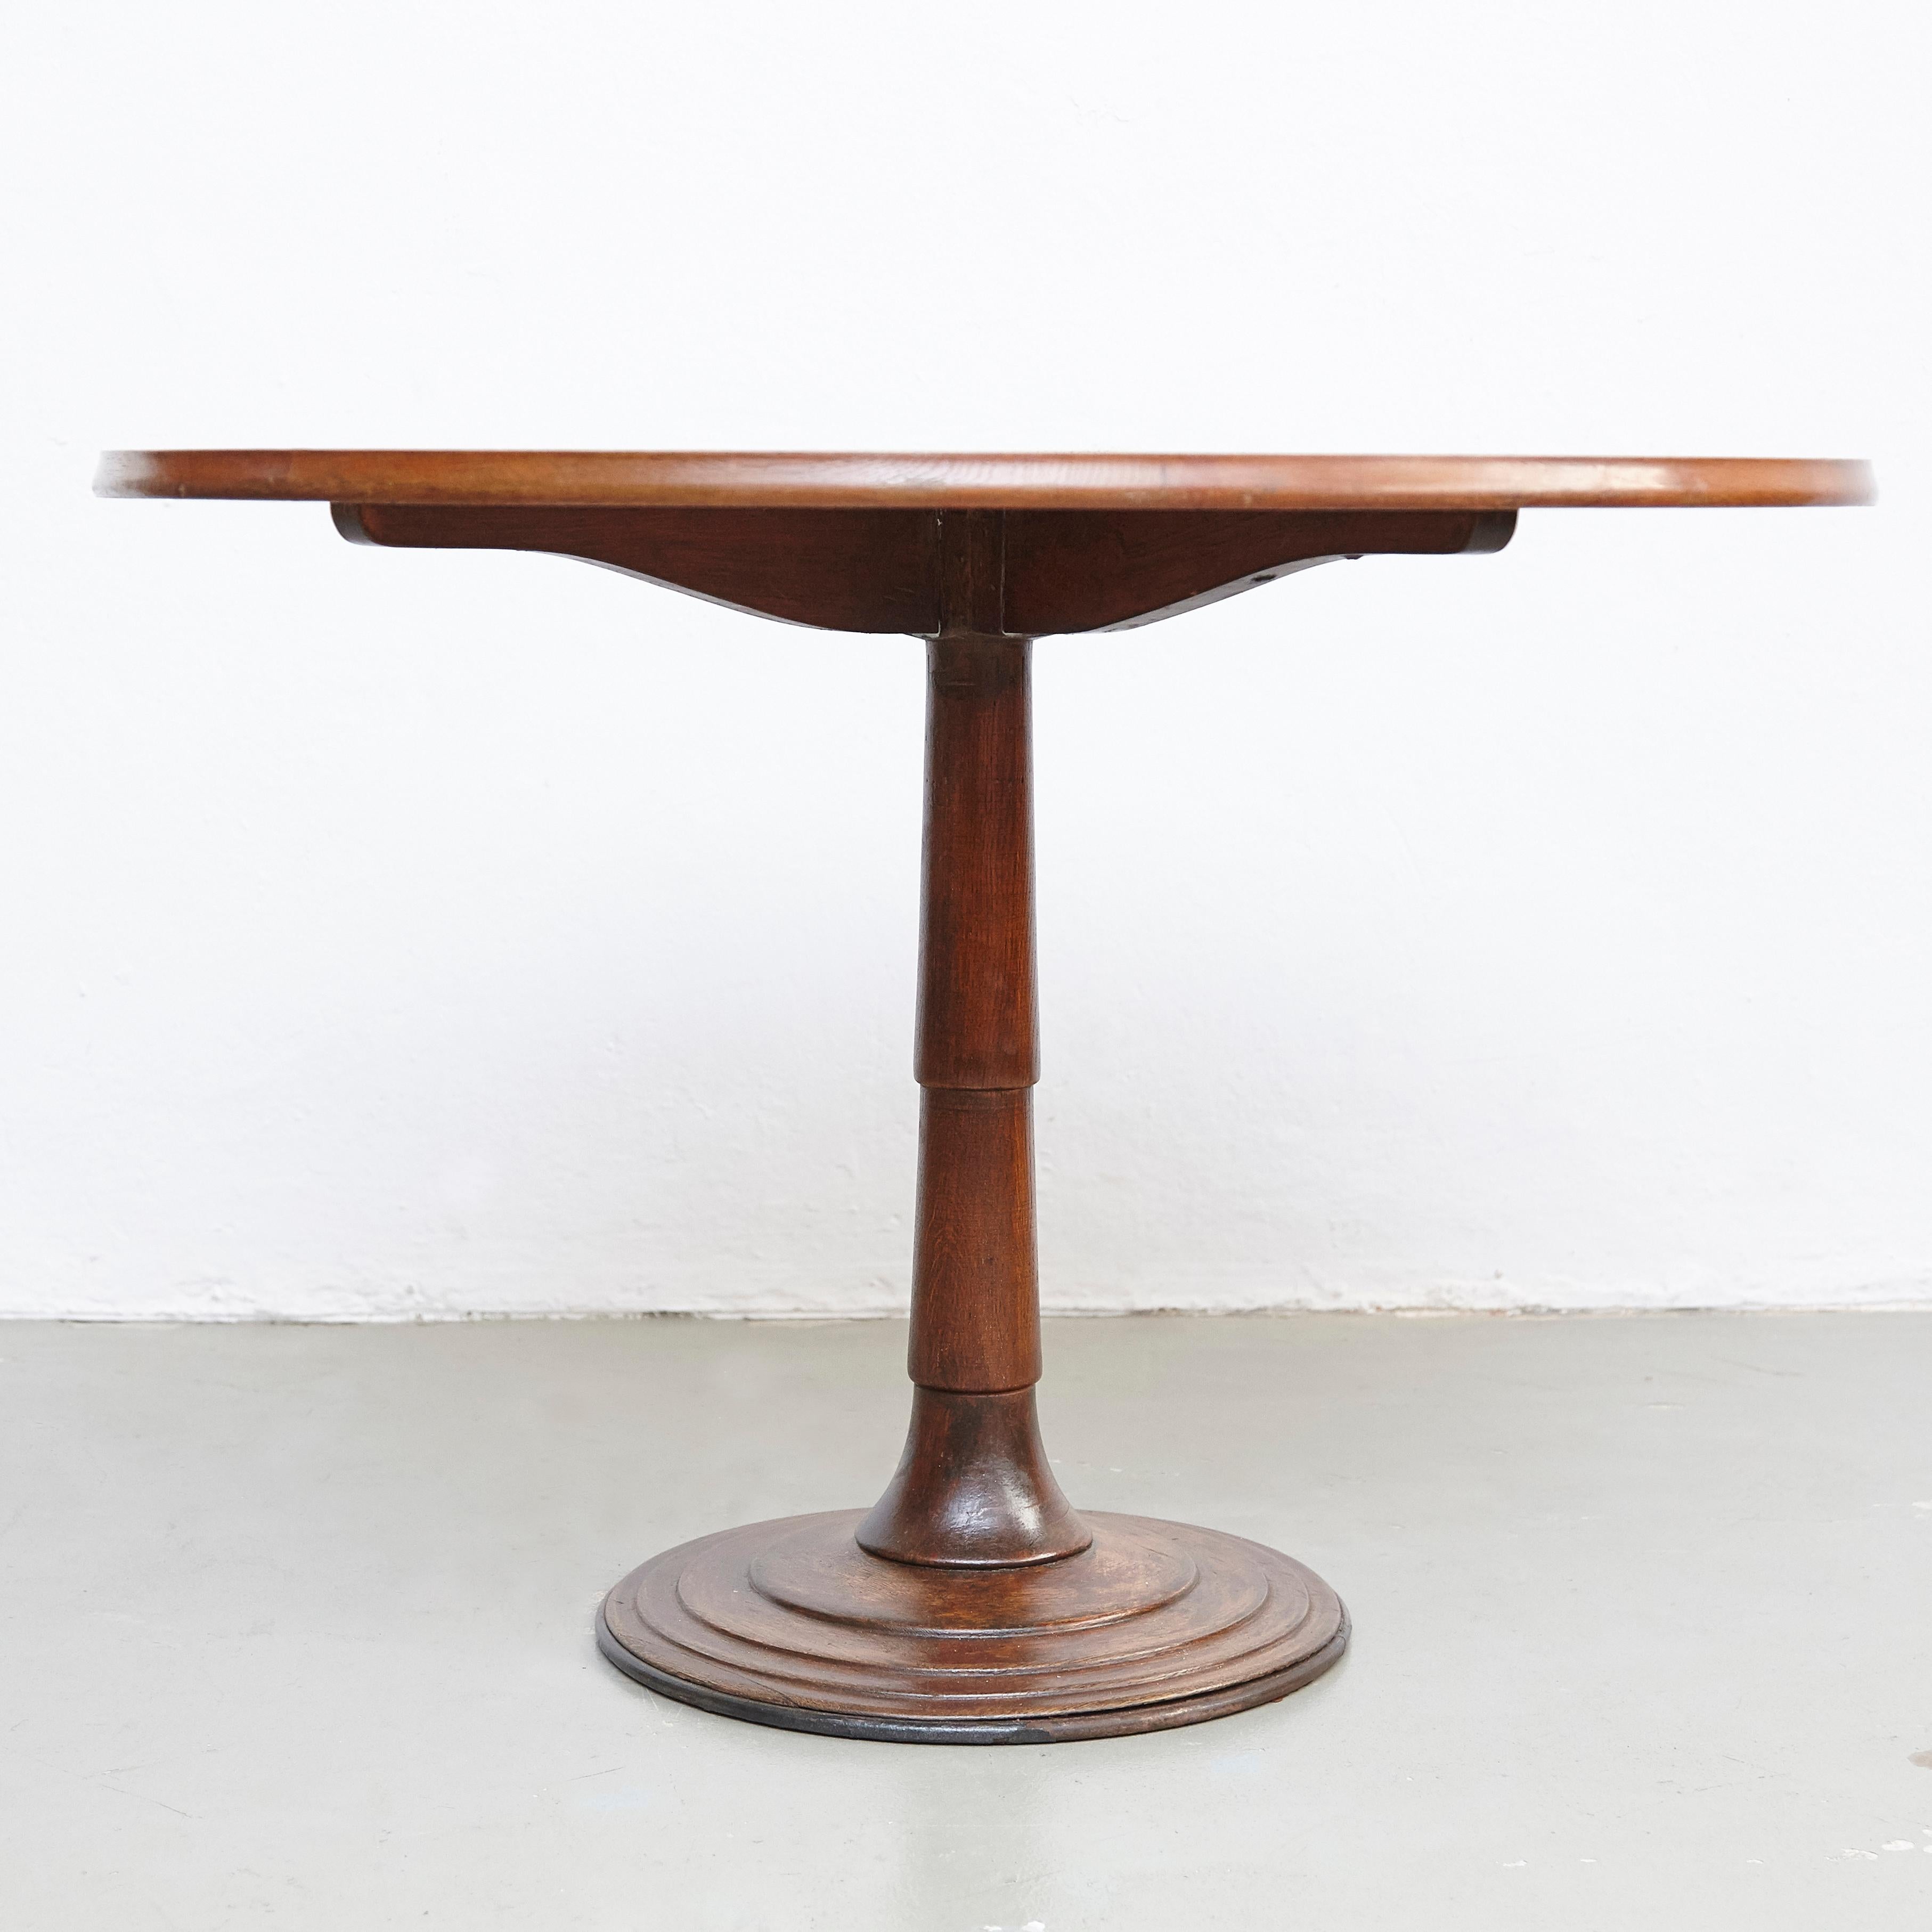 Round dining table designed by Oscar Tusquets in Spain, circa 1970

In good original condition, with minor wear consistent with age and use, preserving a beautiful patina.